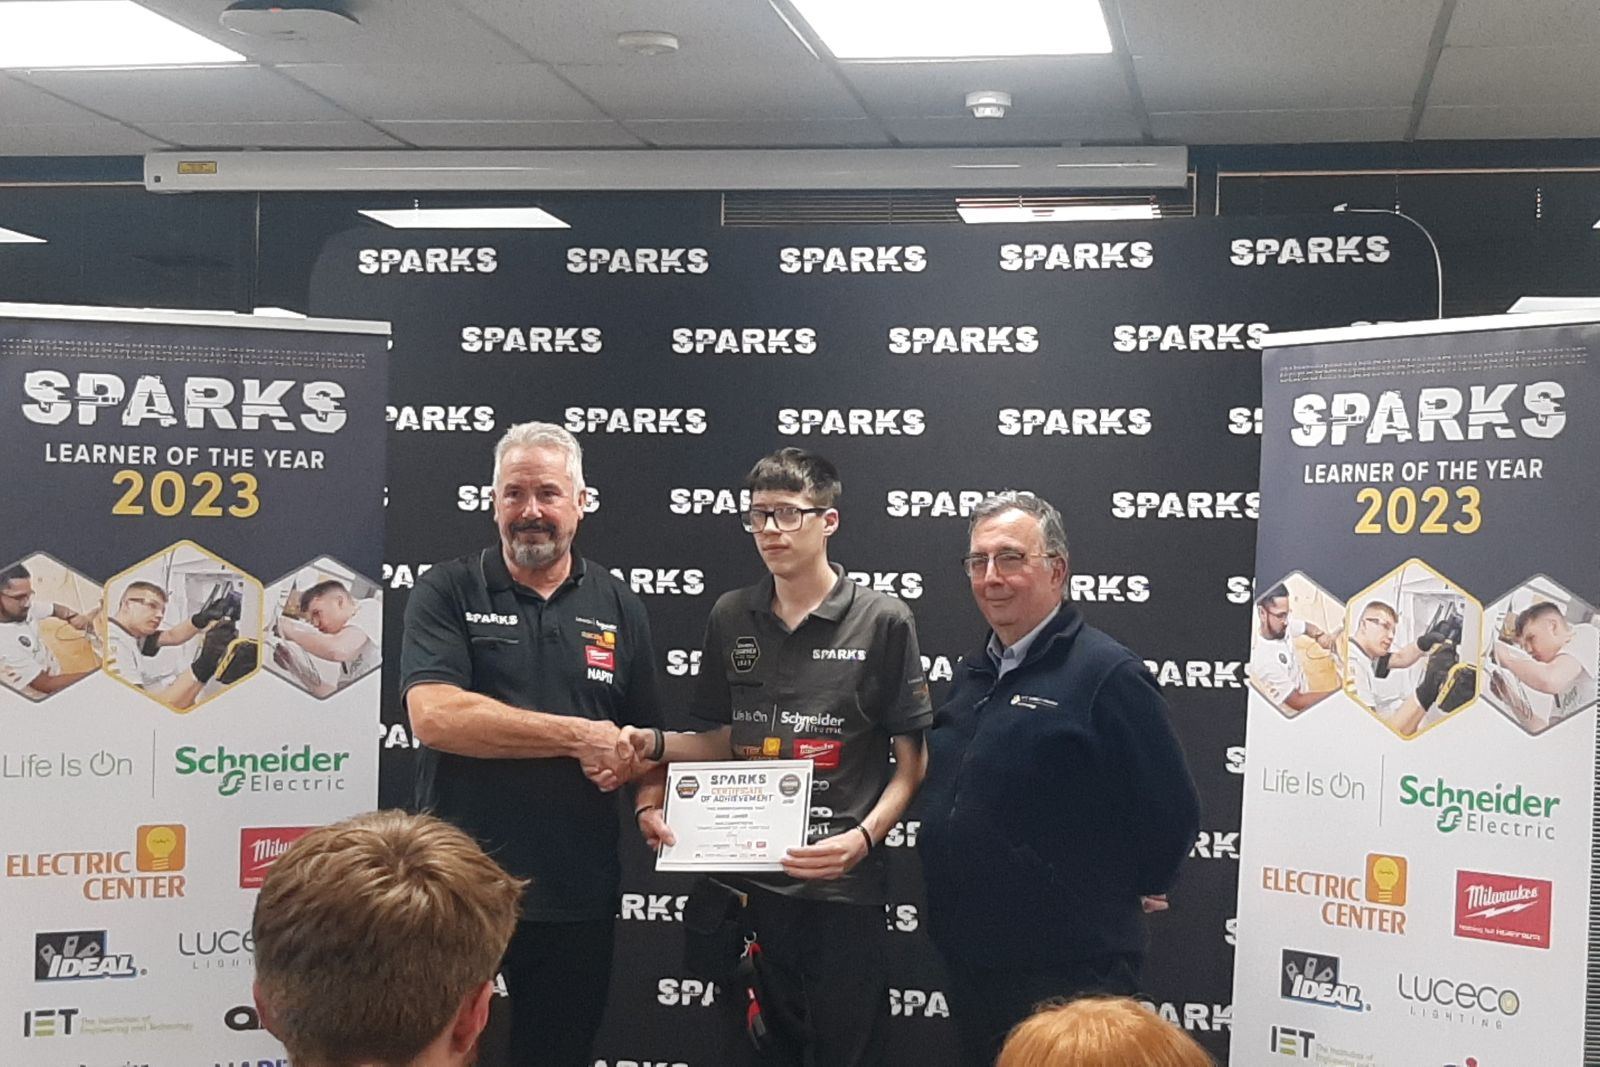 Electrical Installation Apprentice, Reece collecting his certificate